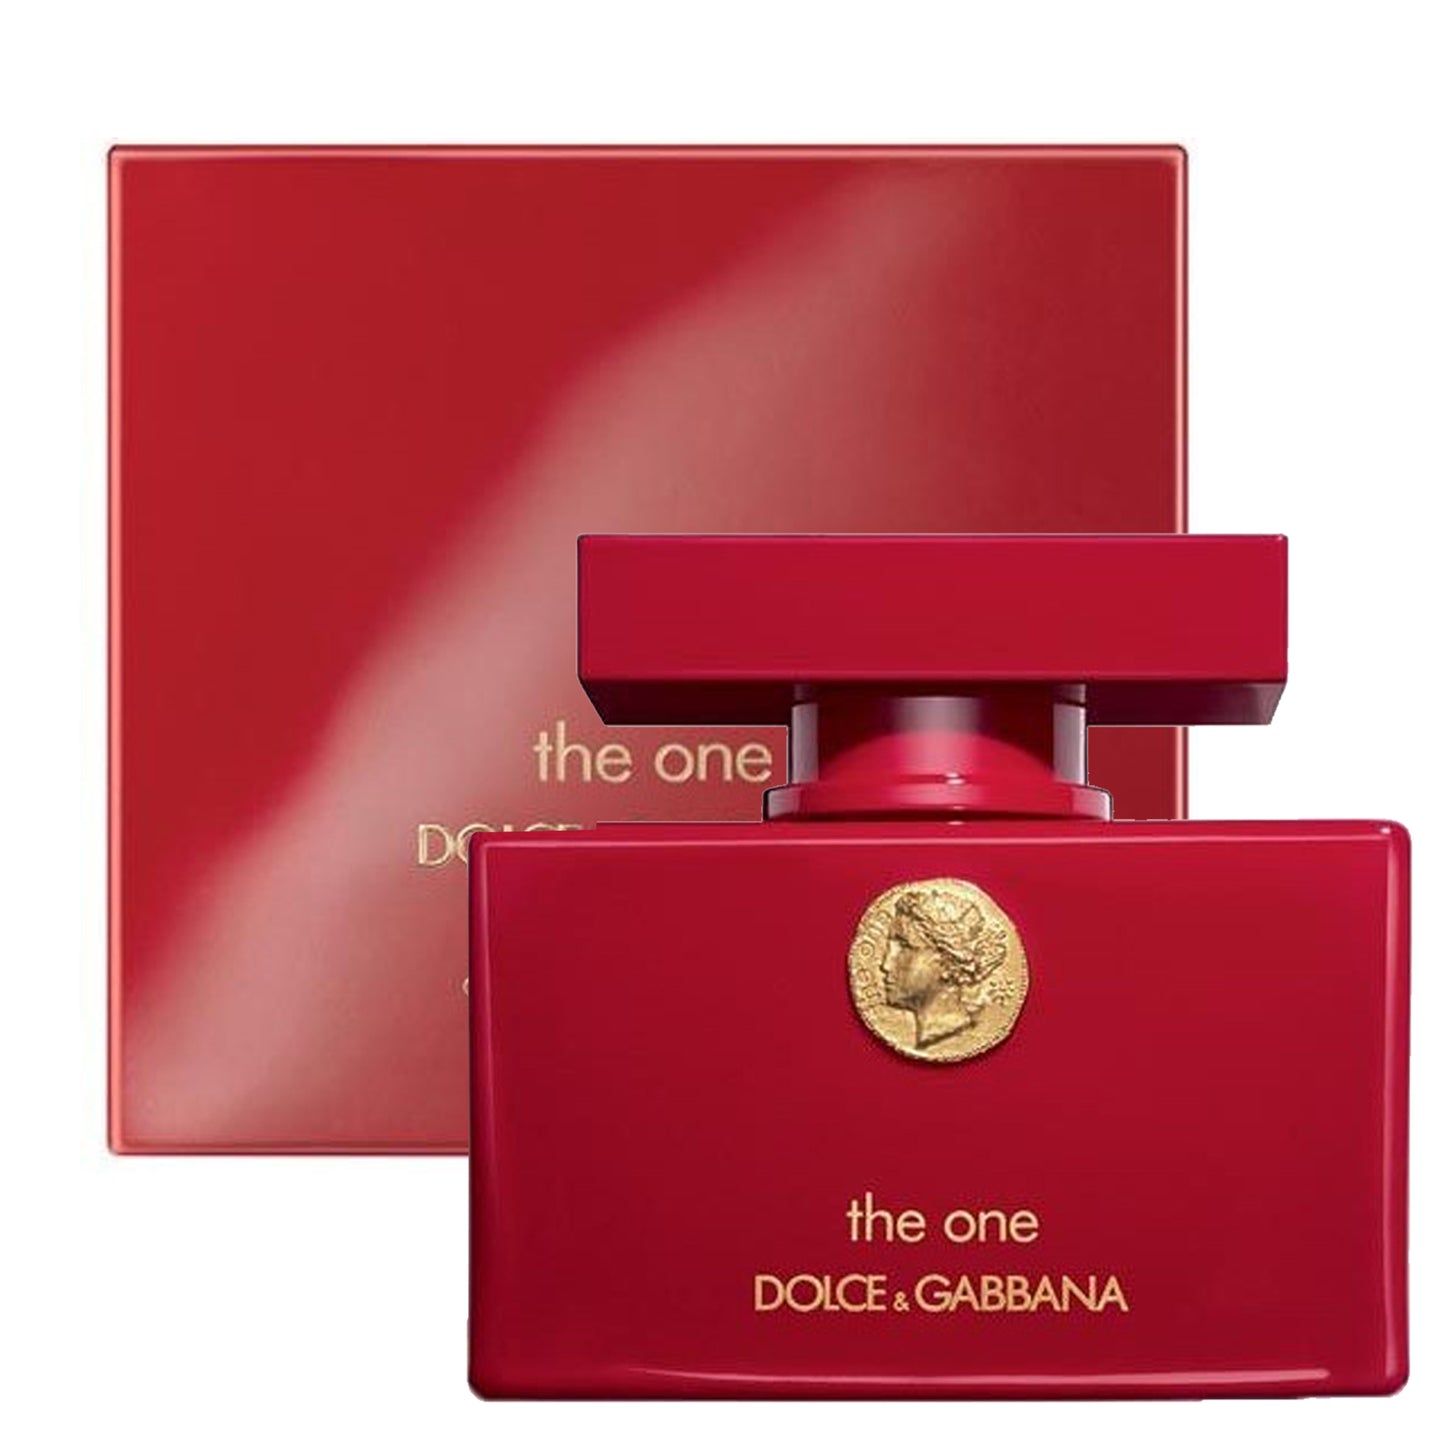 The One Collectors Edition for Women by Dolce & Gabbana